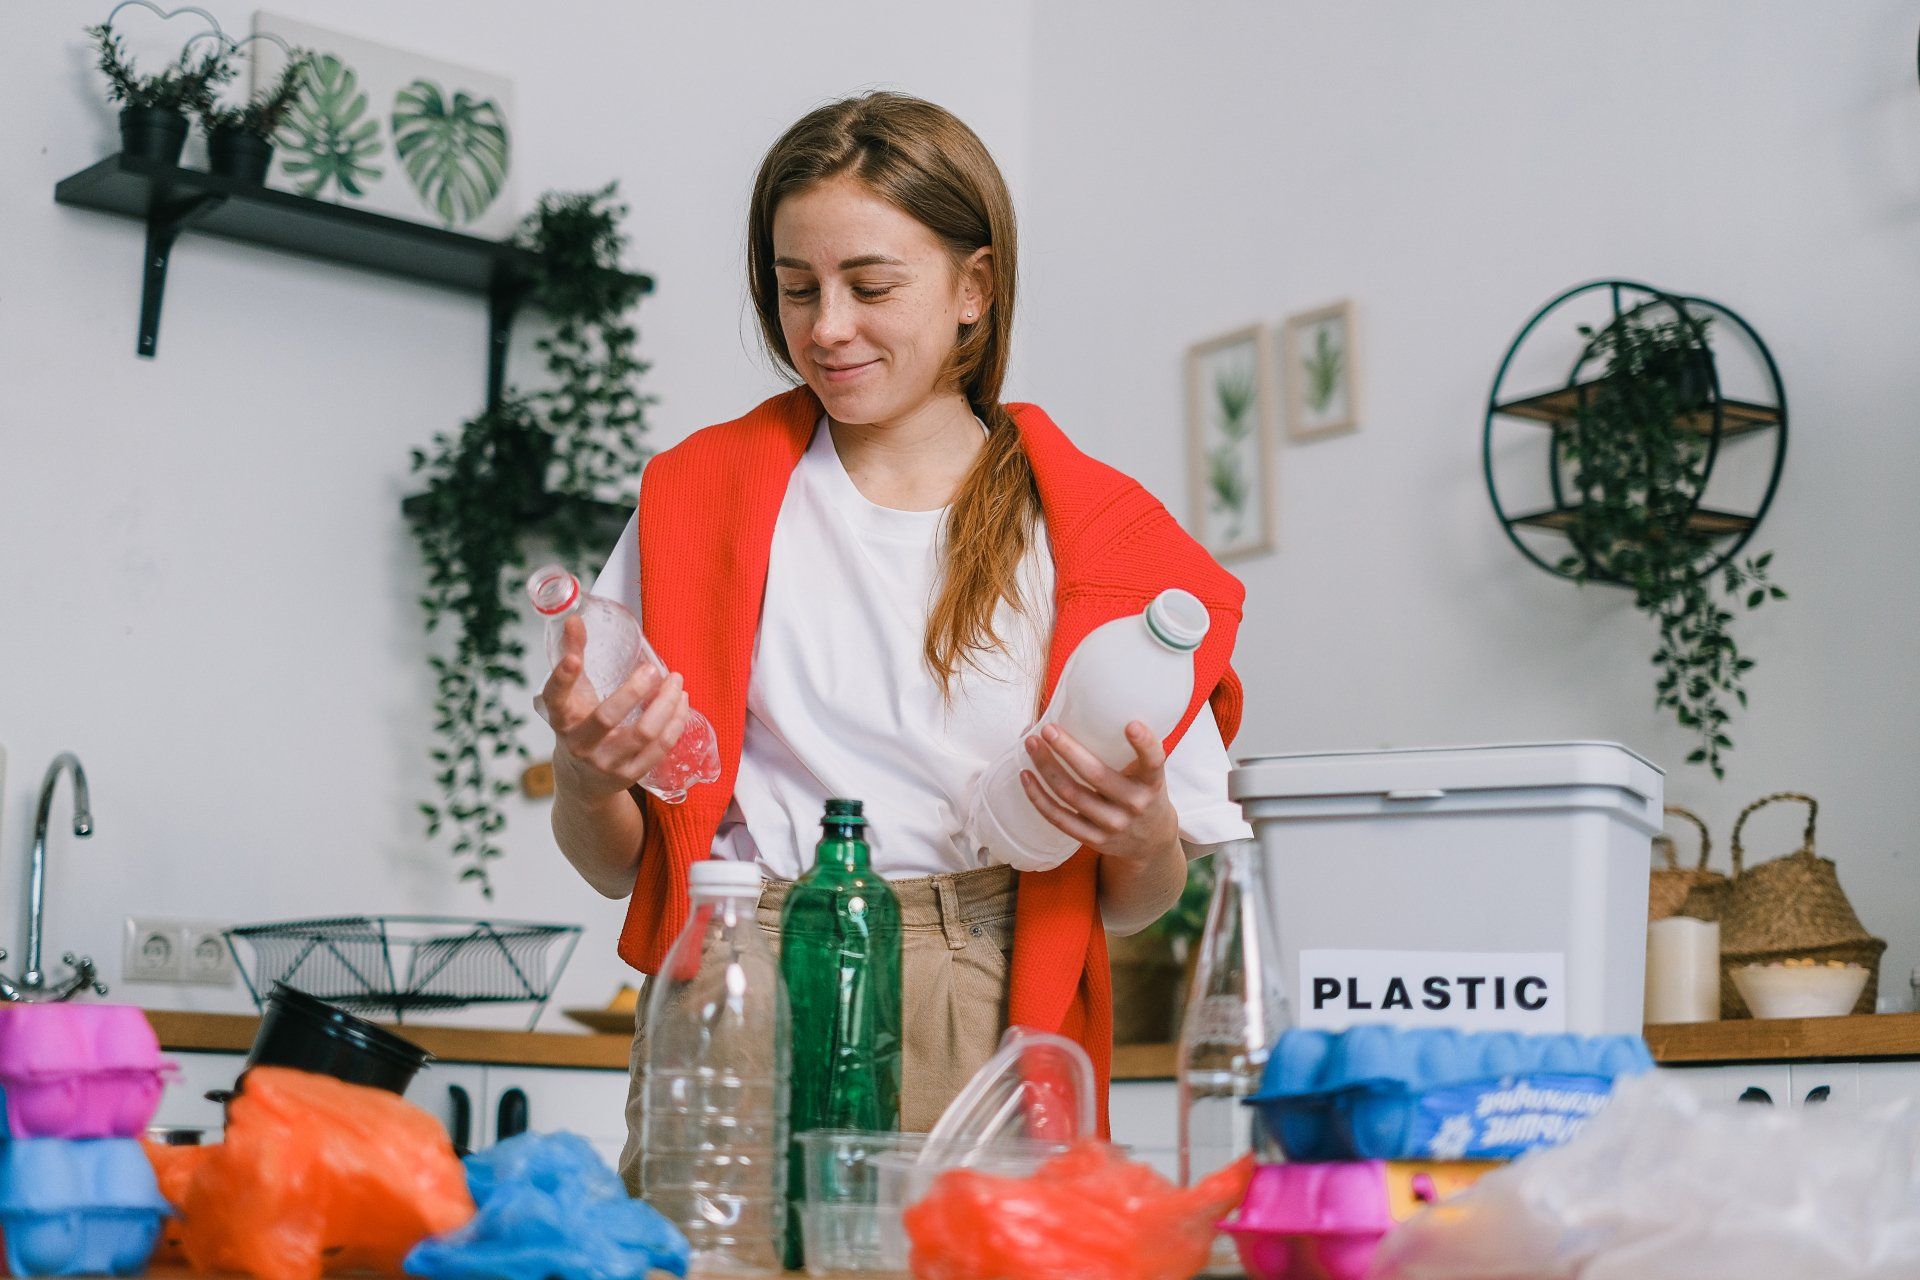 Young woman sorting plastic bottles for recycling.